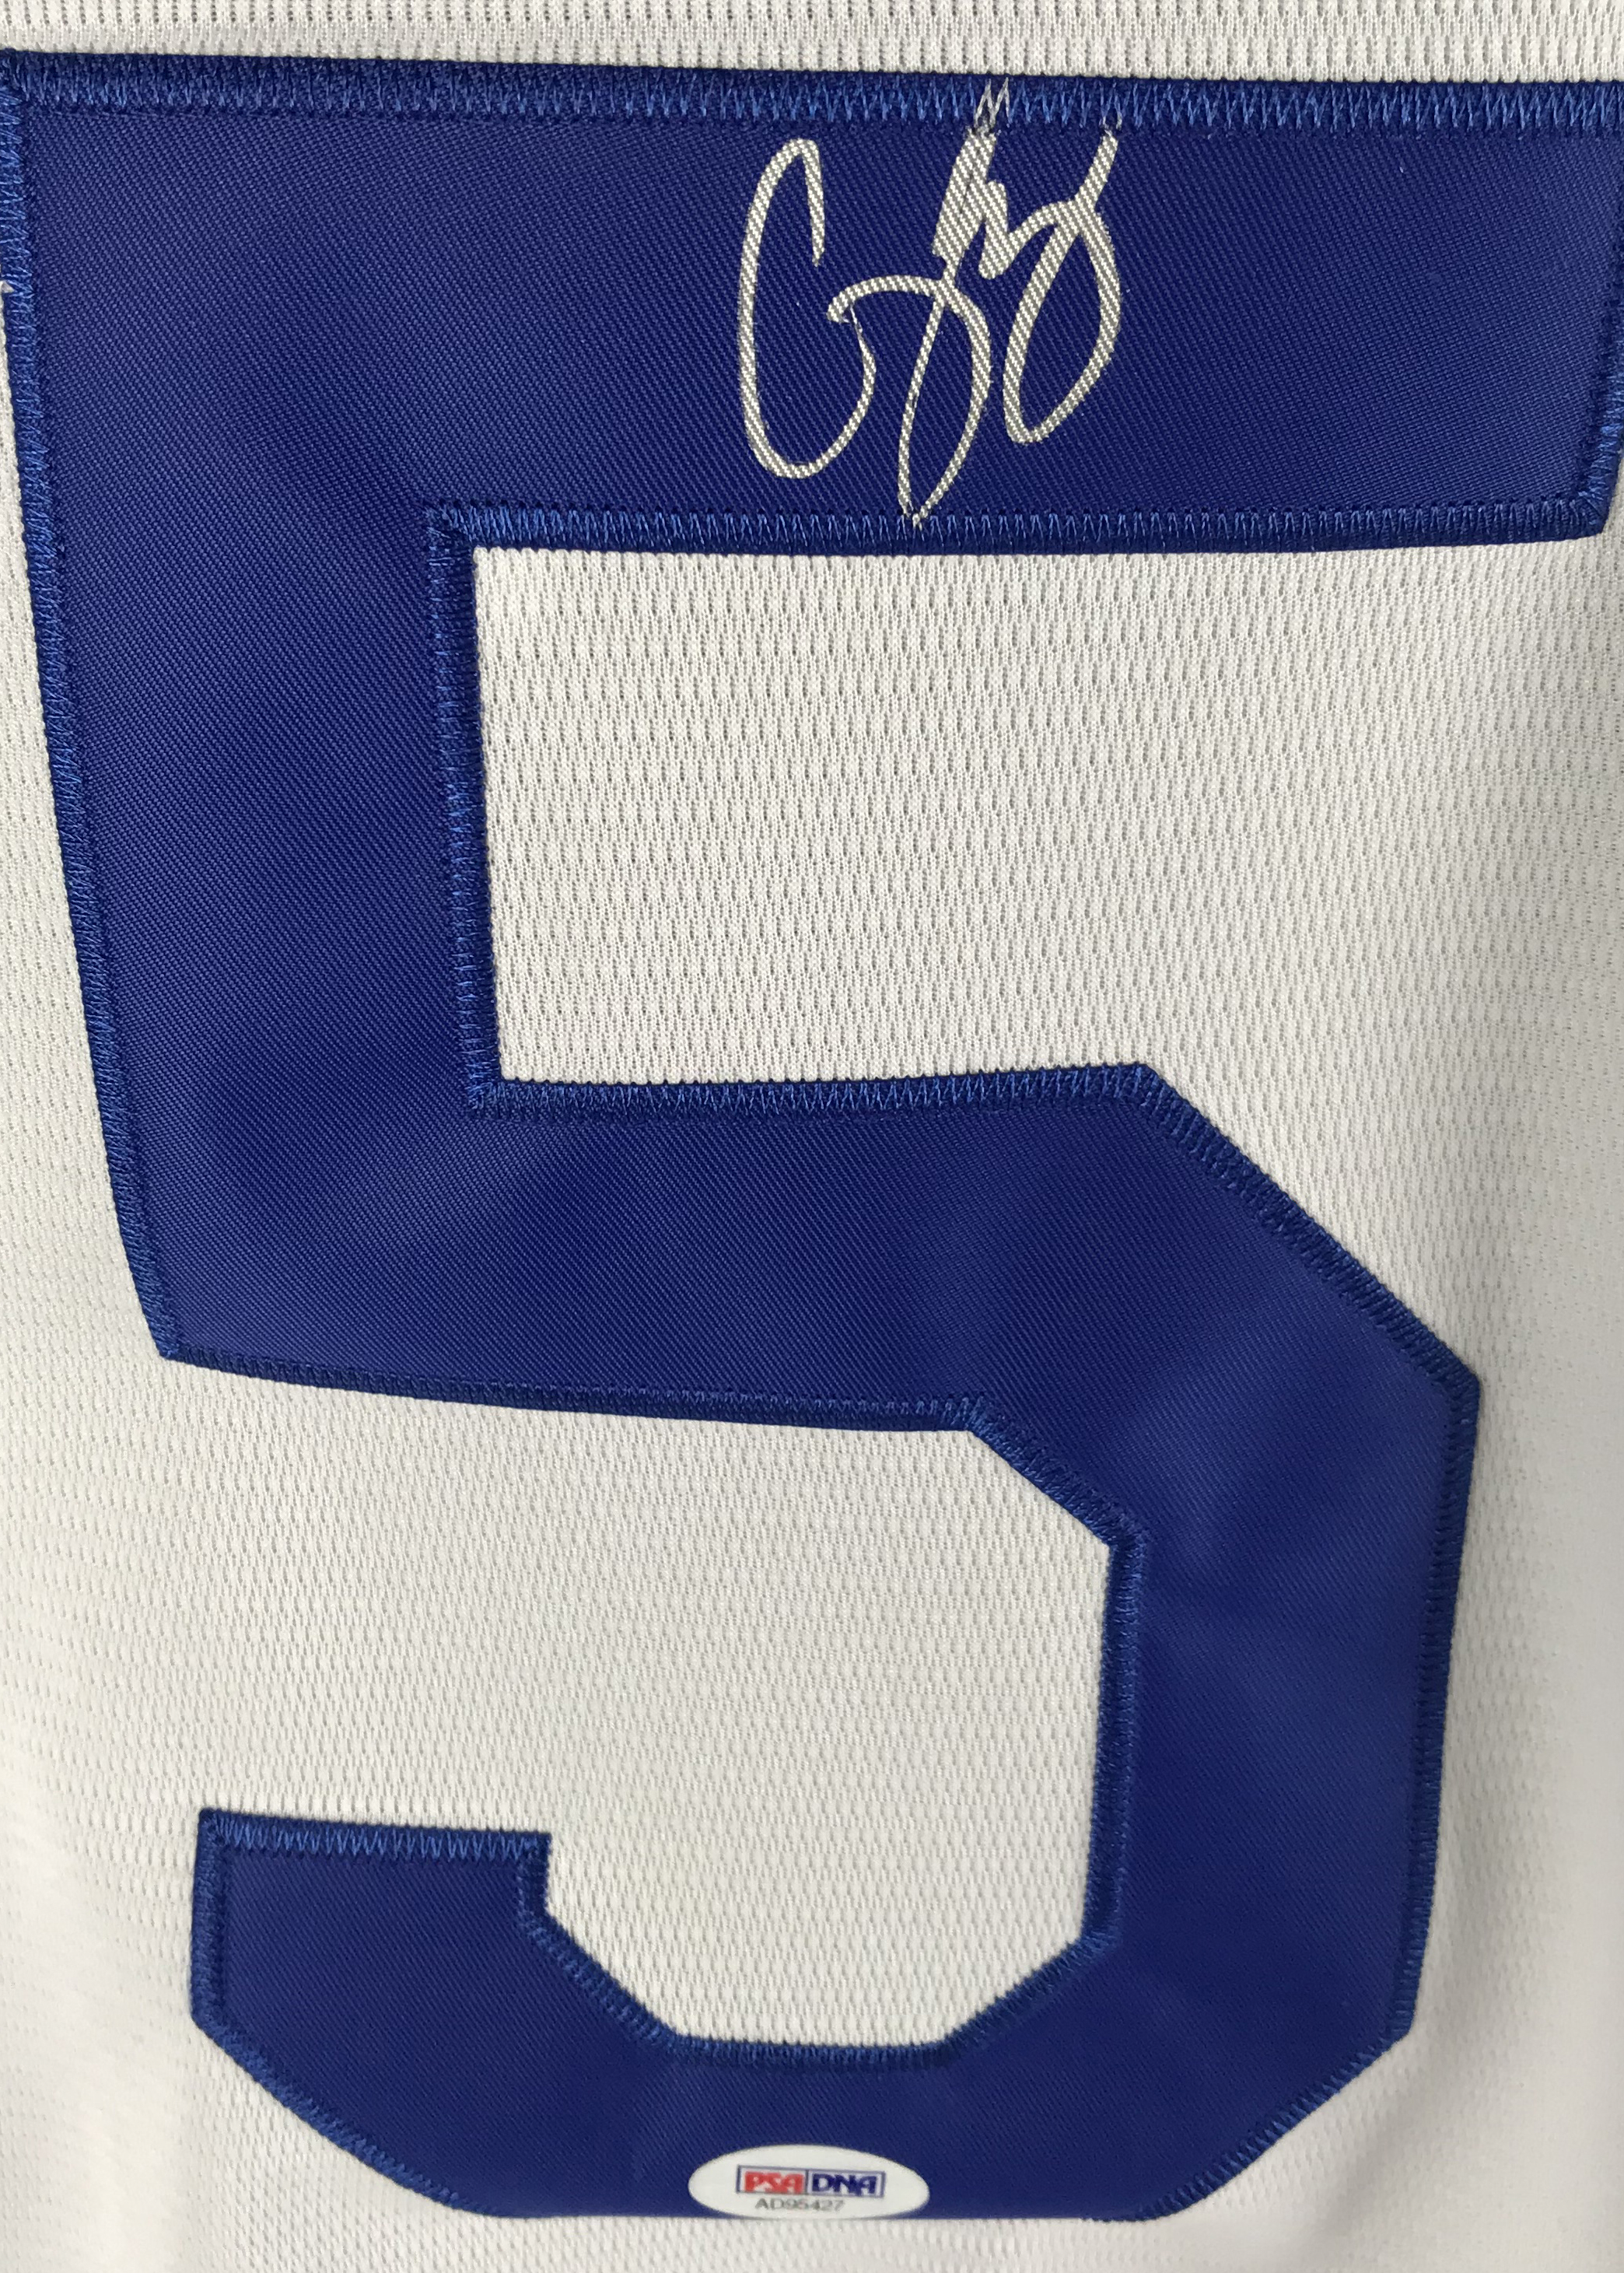 Lot Detail - Corey Seager Signed Los Angeles Dodgers Jersey (PSA/DNA)